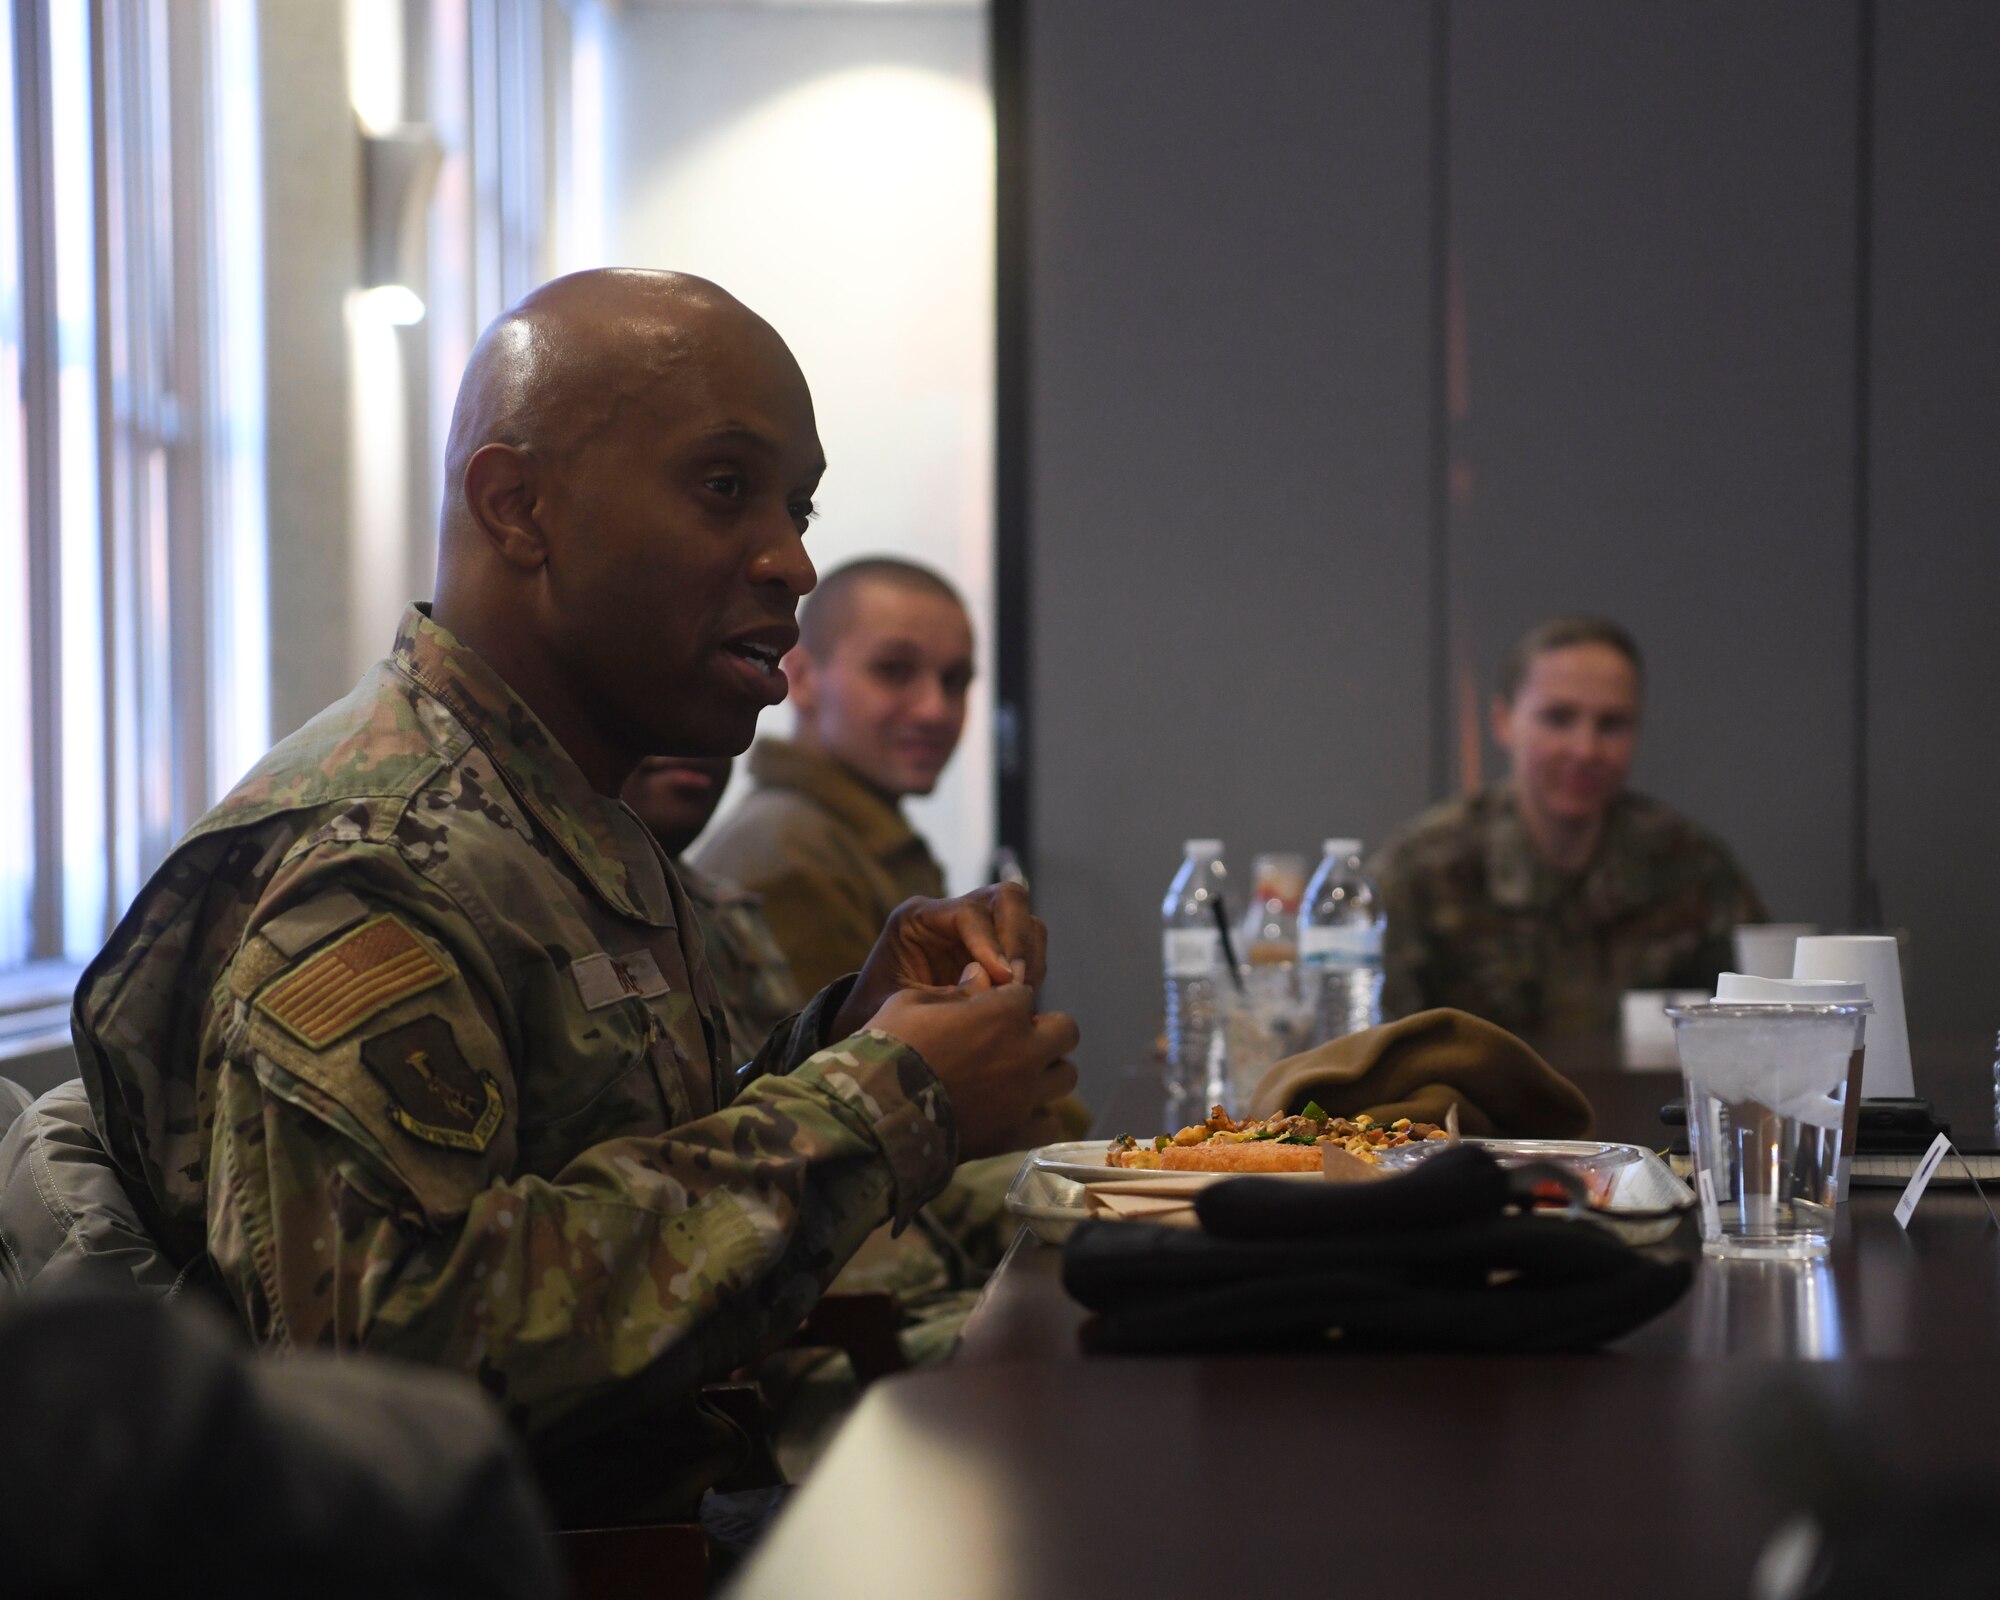 Chief Bruce has breakfast with Airmen from base to discuss any question or concerns they may have for him.